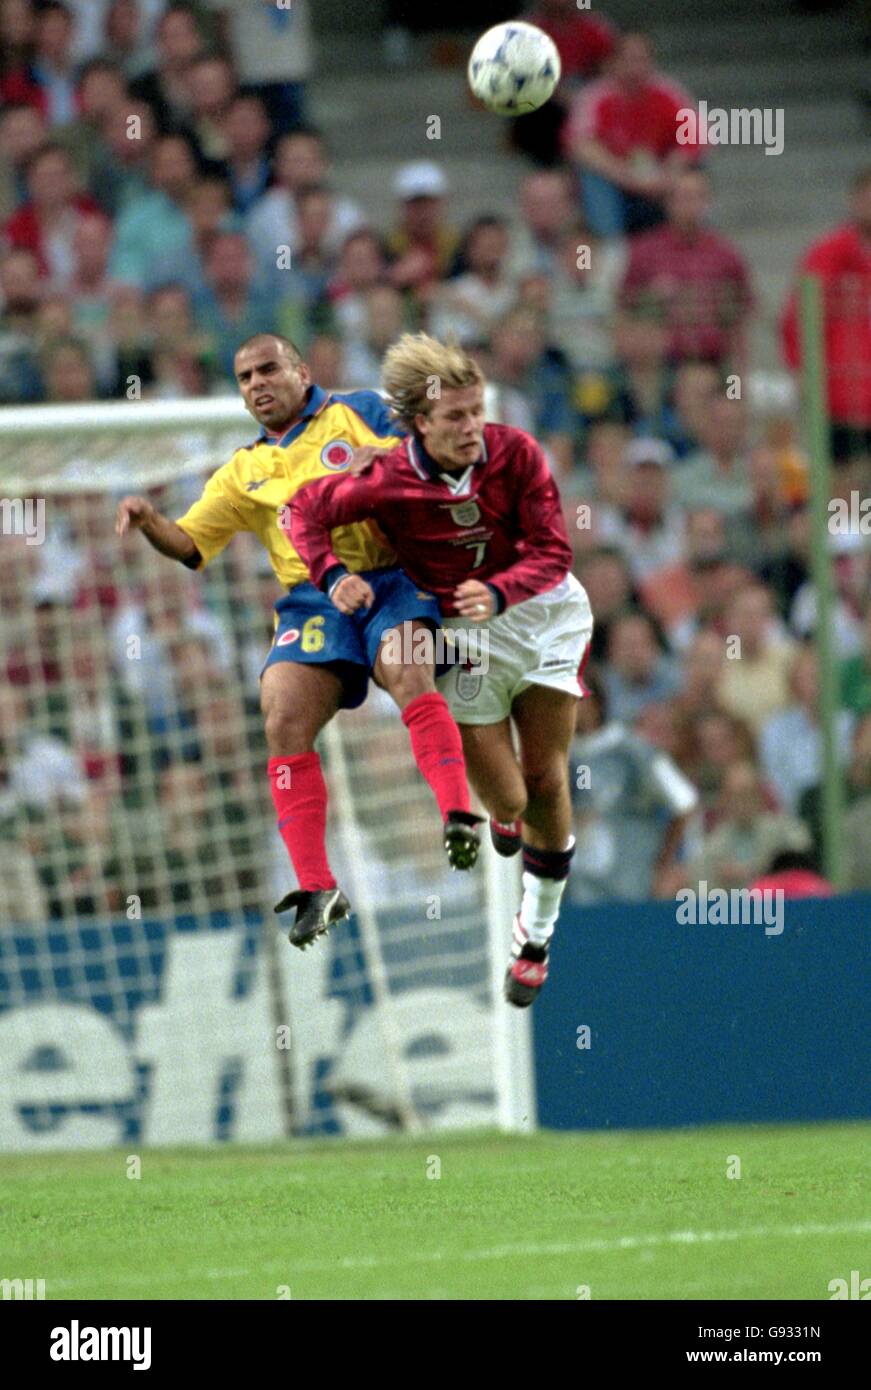 England's David Beckham (right) is challenged by Colombia's Mauricio Serna (left) for a high ball Stock Photo